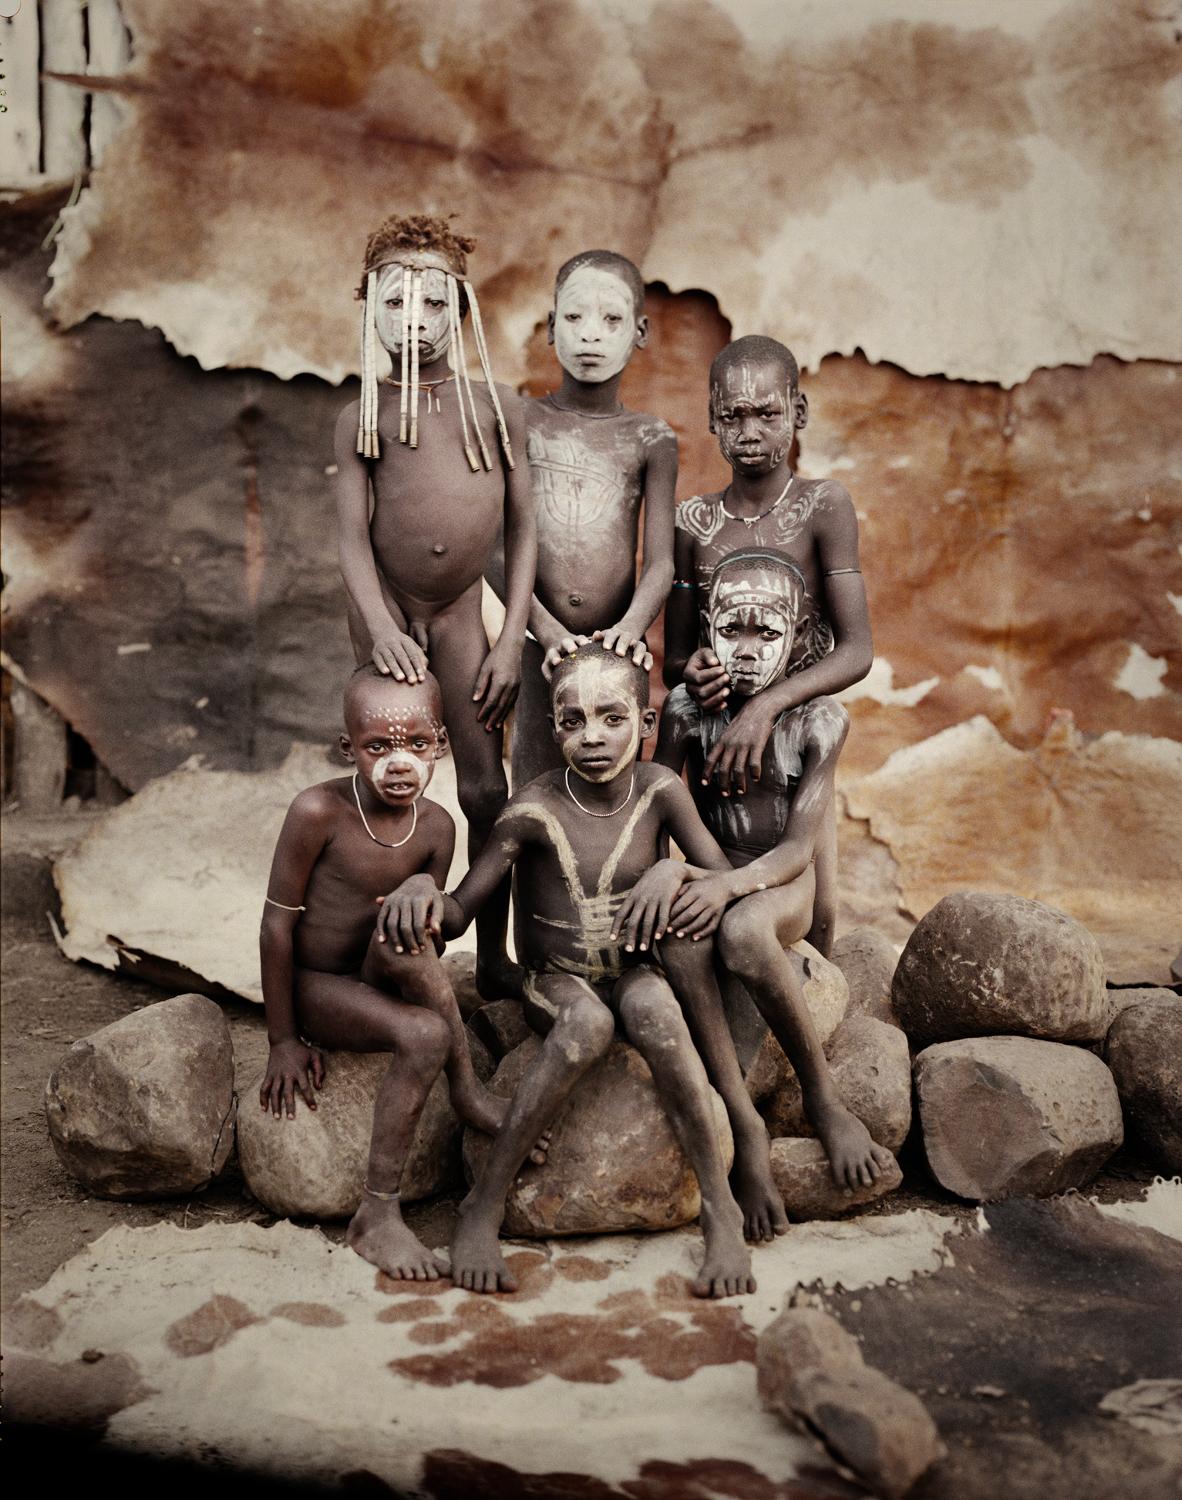 "XI 261 - Hilao Moyizo Village -Omo Valley Ethiopia, 2011

The nomadic Mursi people live in the lower area of Africa’s Great Rift Valley. Extreme drought has made it difficult for them to feed themselves by means of traditional cultivation and